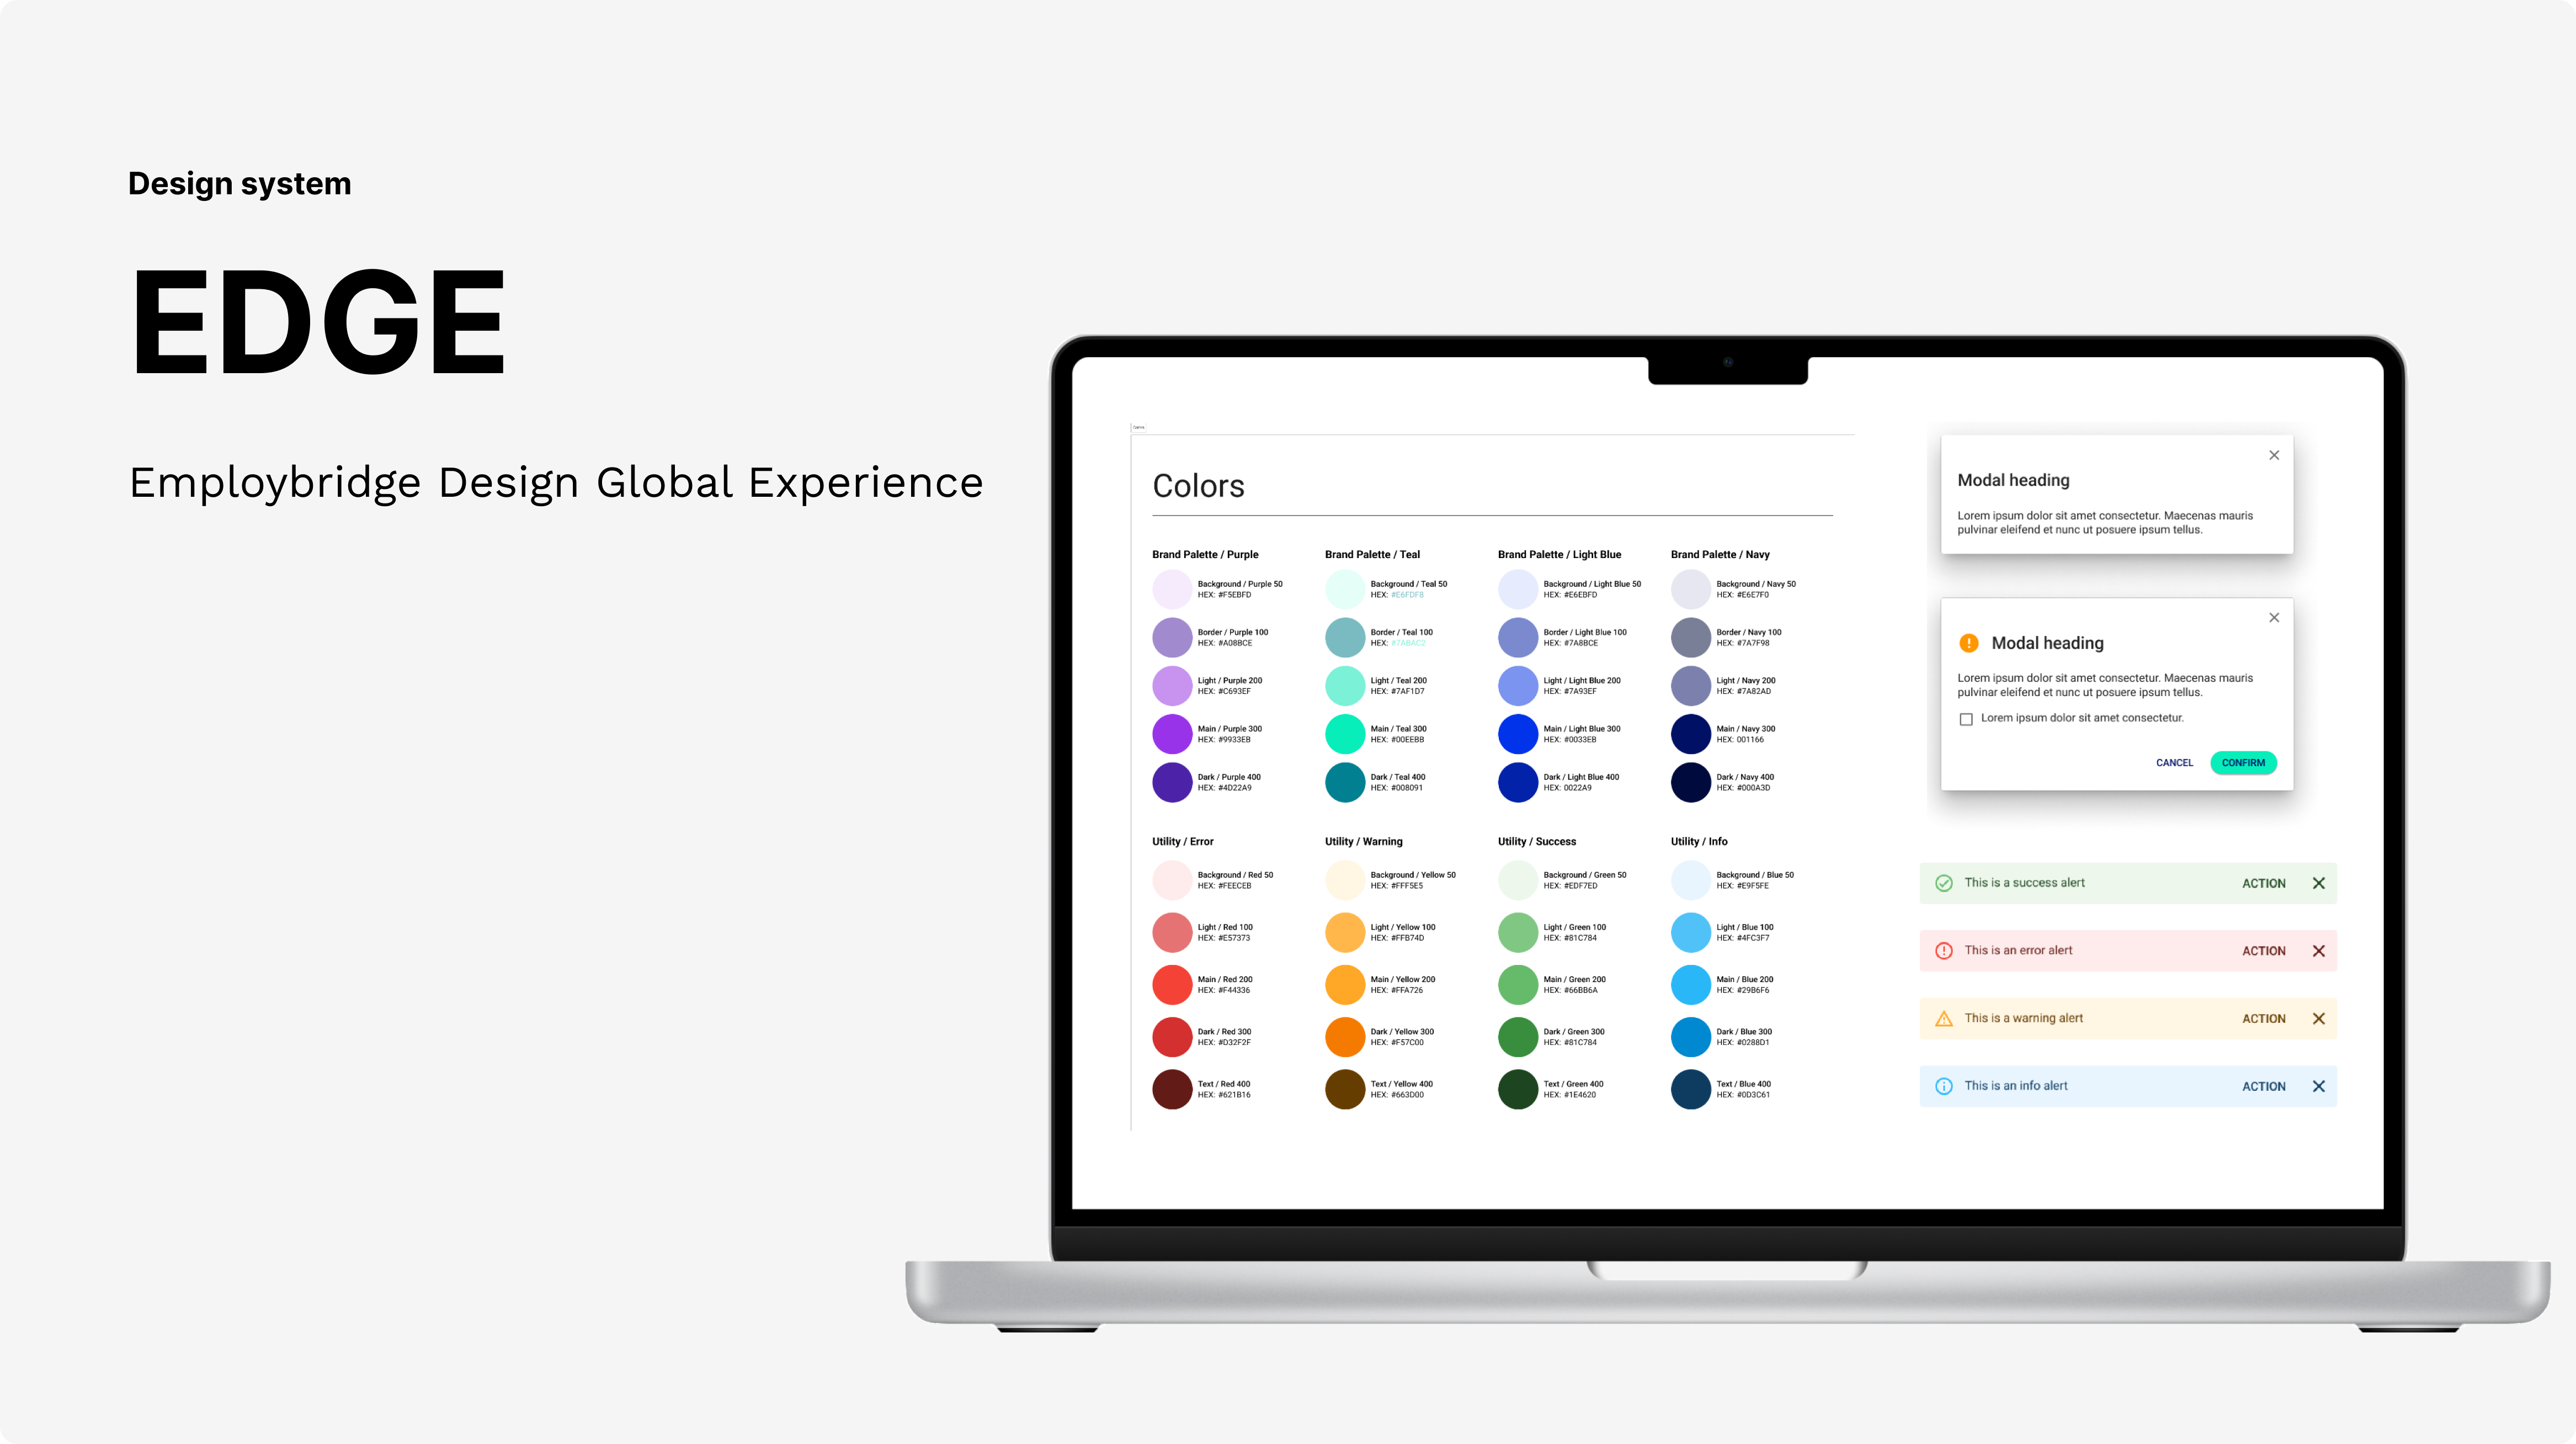 Title saying: Design system EDGE (Employbridge design global experience) with a mockup of design system components (colors, modals, toasts) on a laptop.